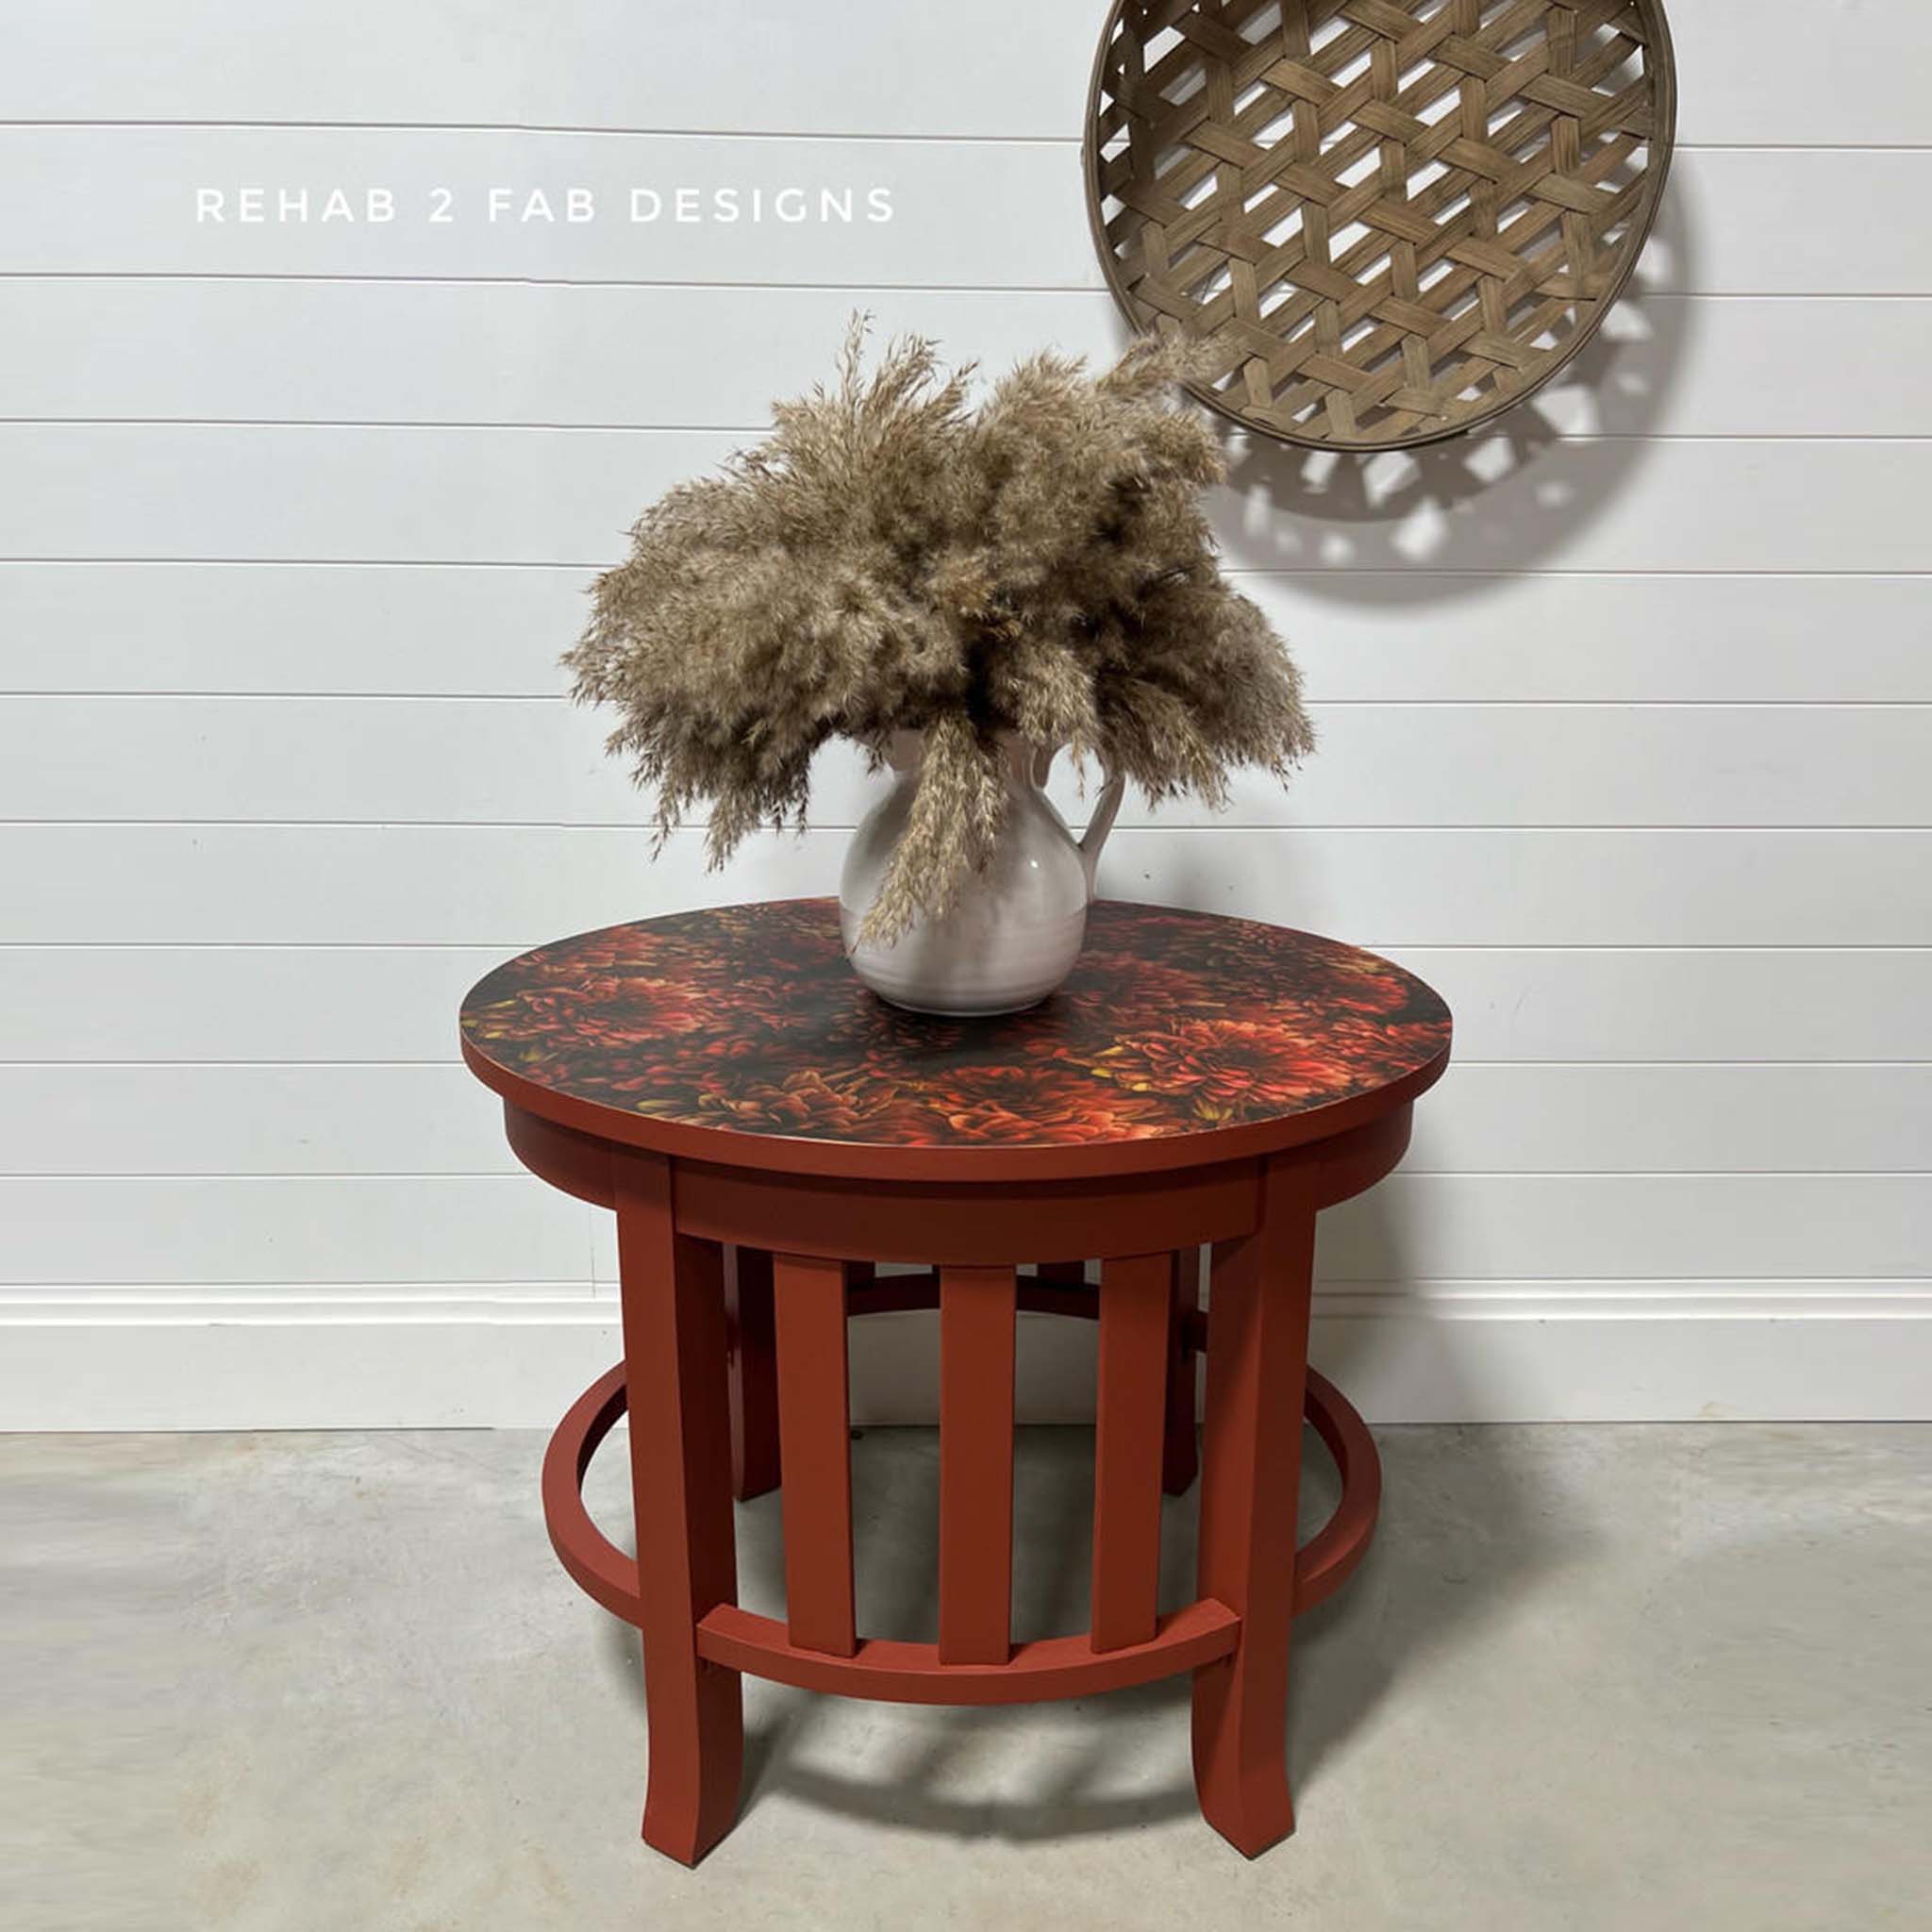 A small round side table is painted burnt orange and features Belles and Whistles' Moody Mums A1 rice paper on the table top.